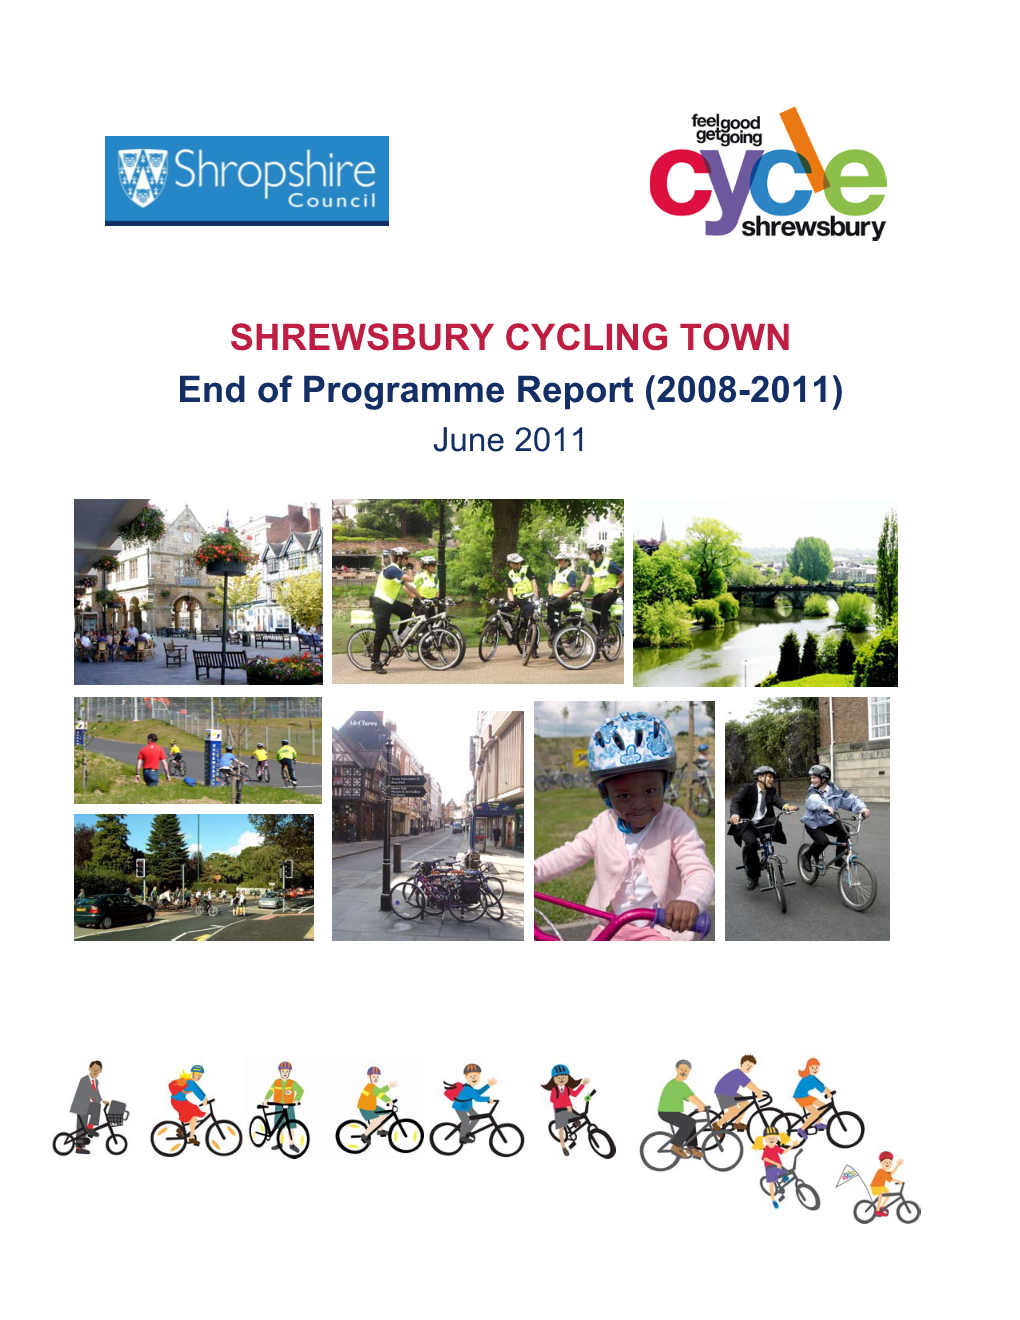 SHREWSBURY CYCLING TOWN End of Programme Report (2008-2011) June 2011